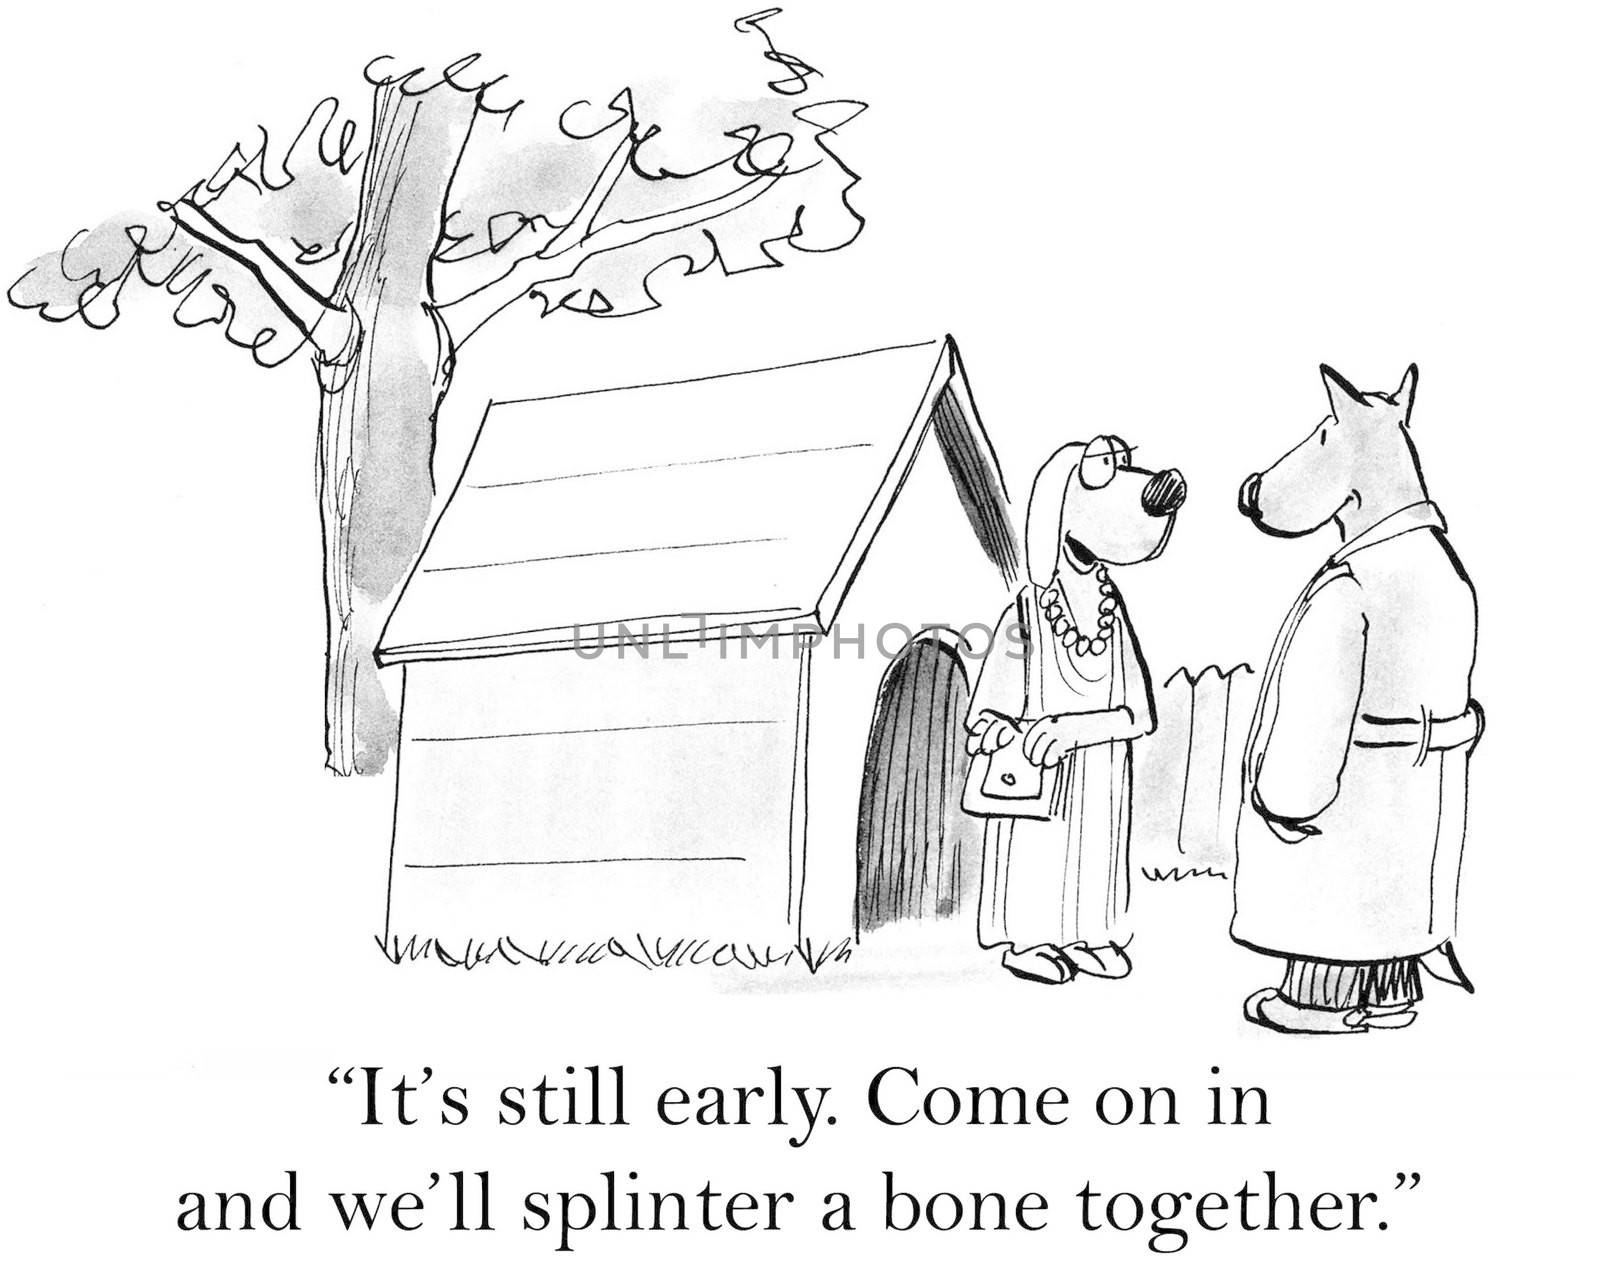 "It's still early. Come on in and we'll splinter a bone together."